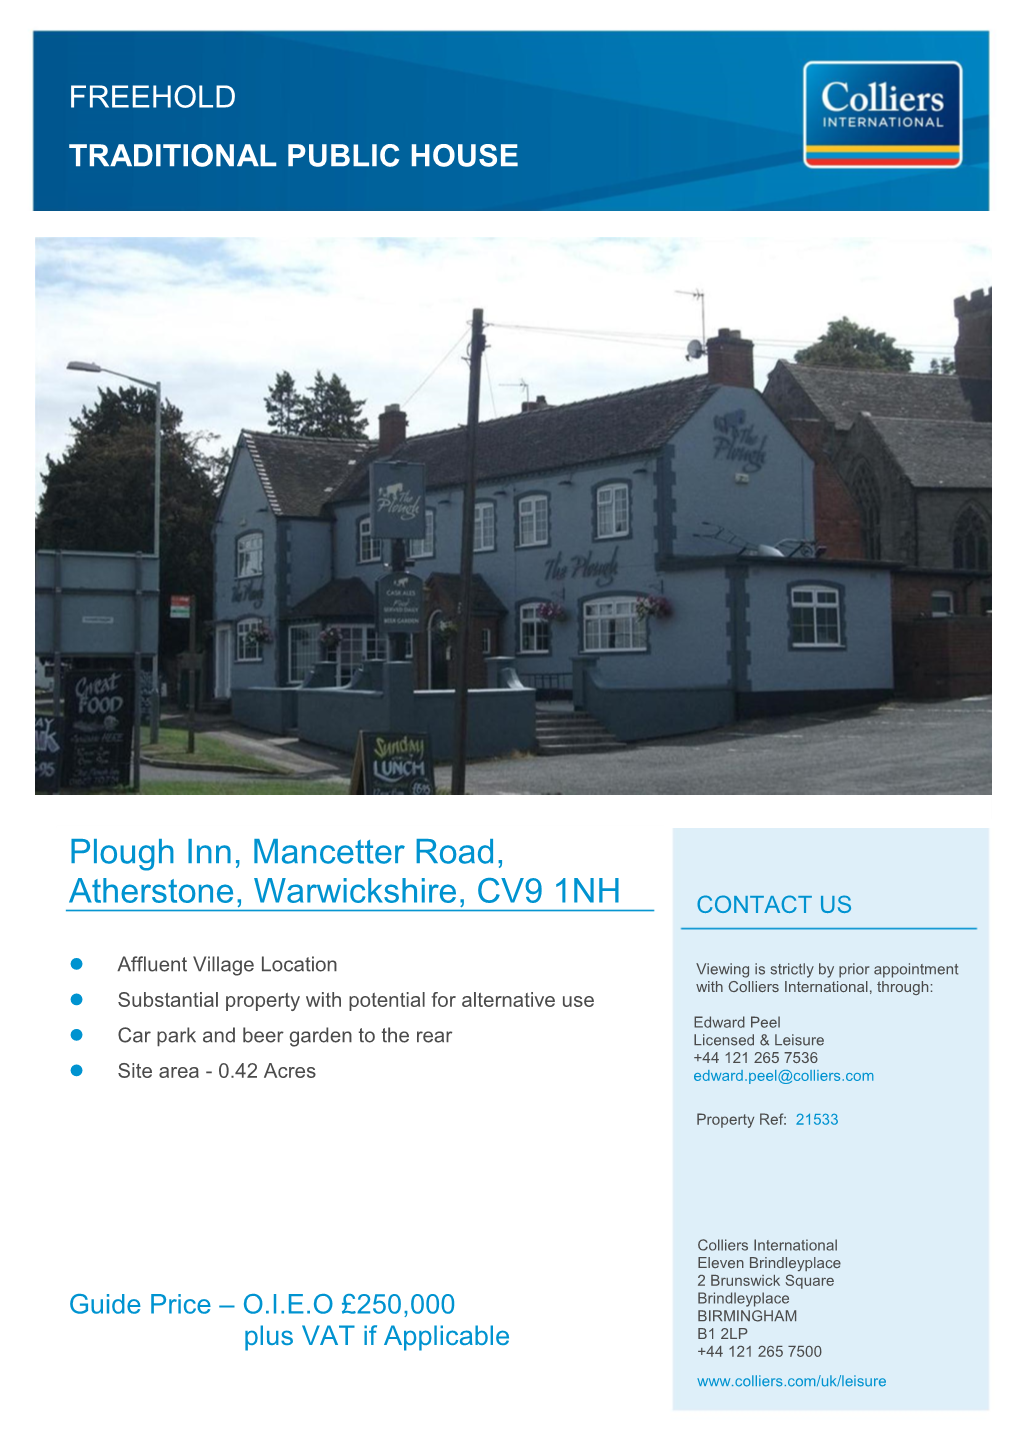 Plough Inn, Mancetter Road, Atherstone, Warwickshire, CV9 1NH CONTACT US